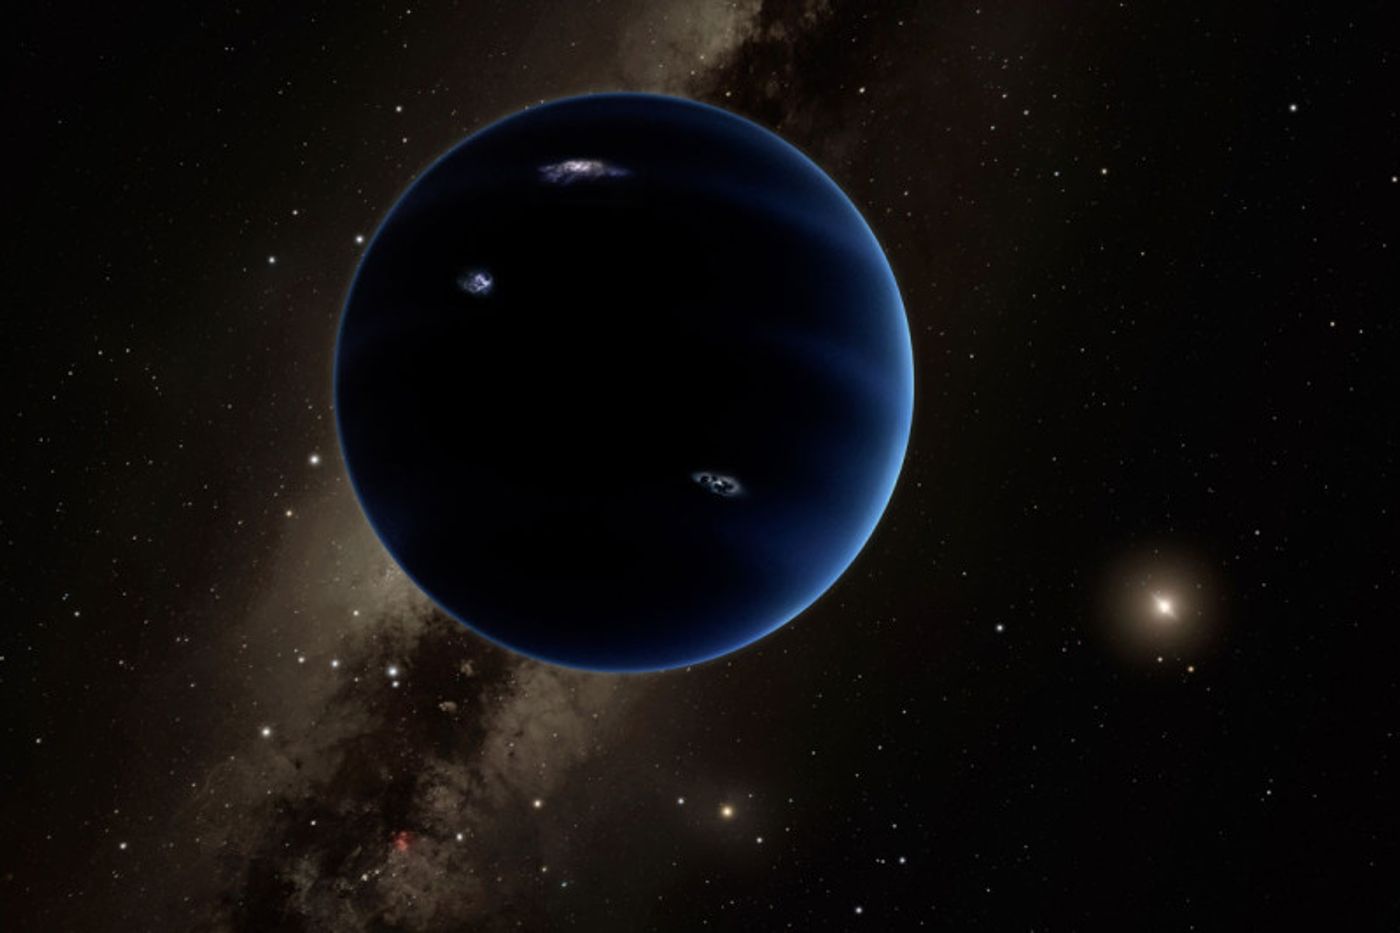 Planet Nine is turning out to be quite a difficult planet to find.